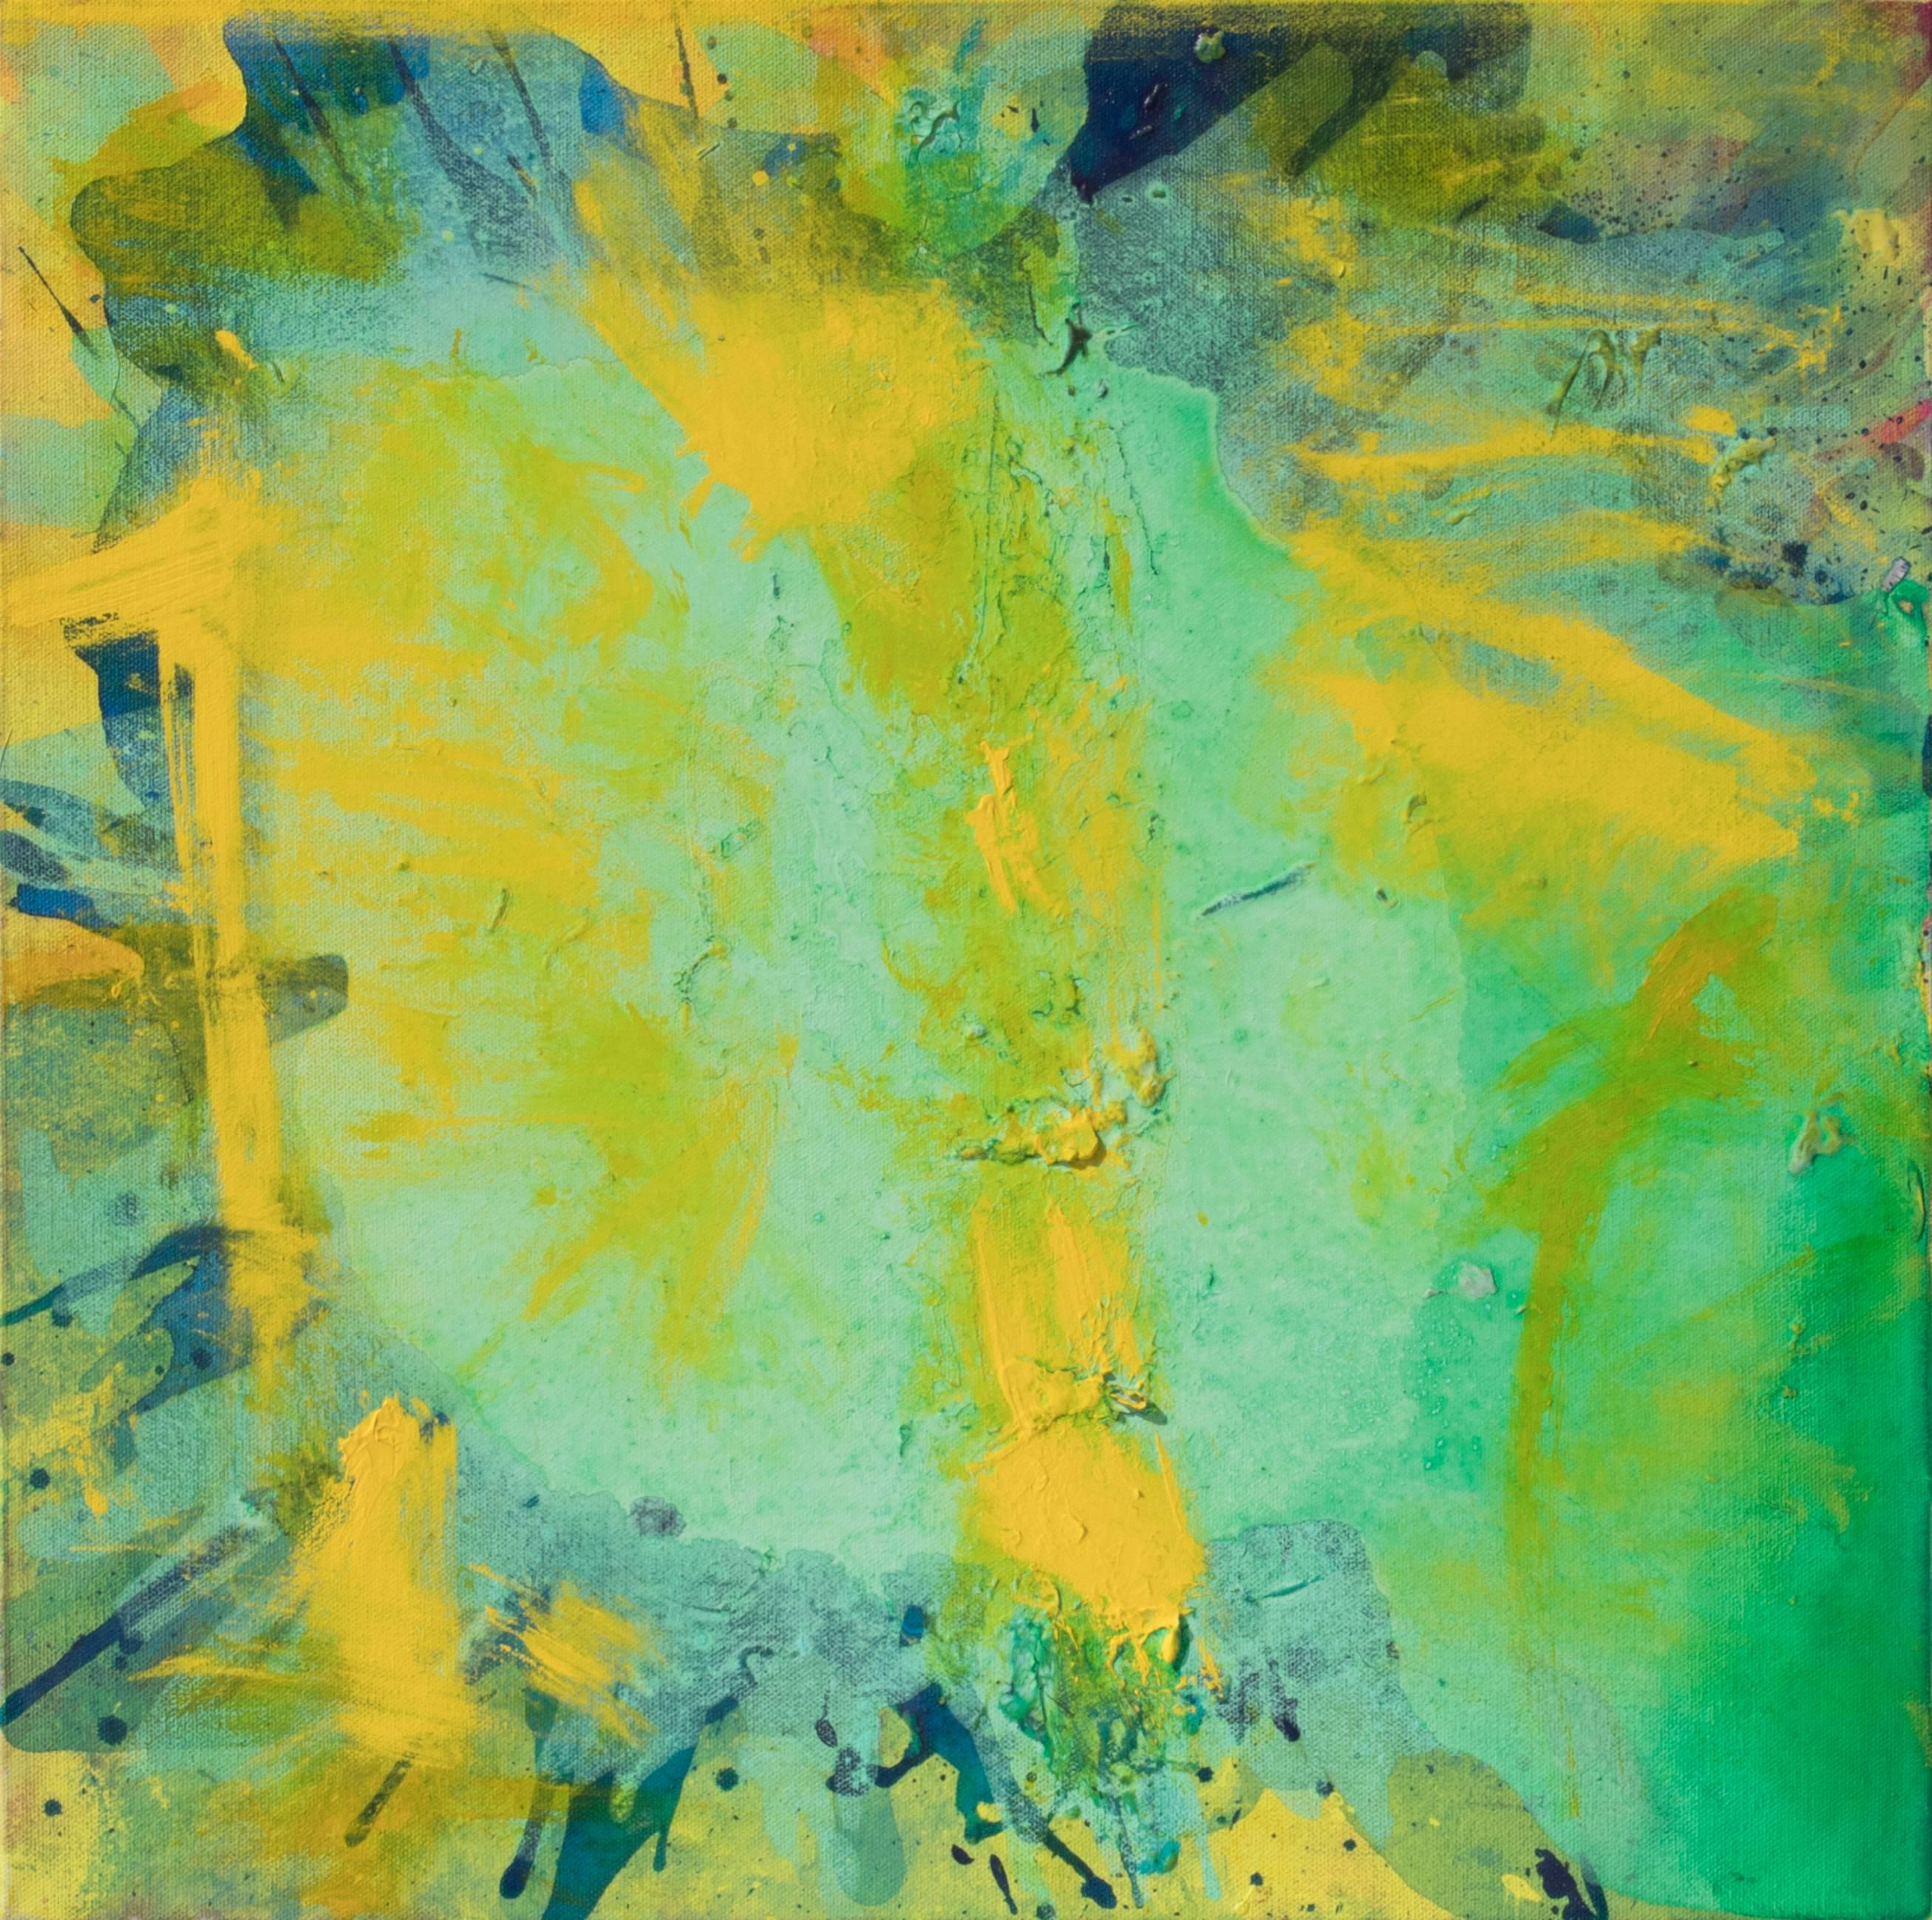 J. Steven Manolis Abstract Painting - Universe (Green, Yellow, Abstract Expressionist Painting)